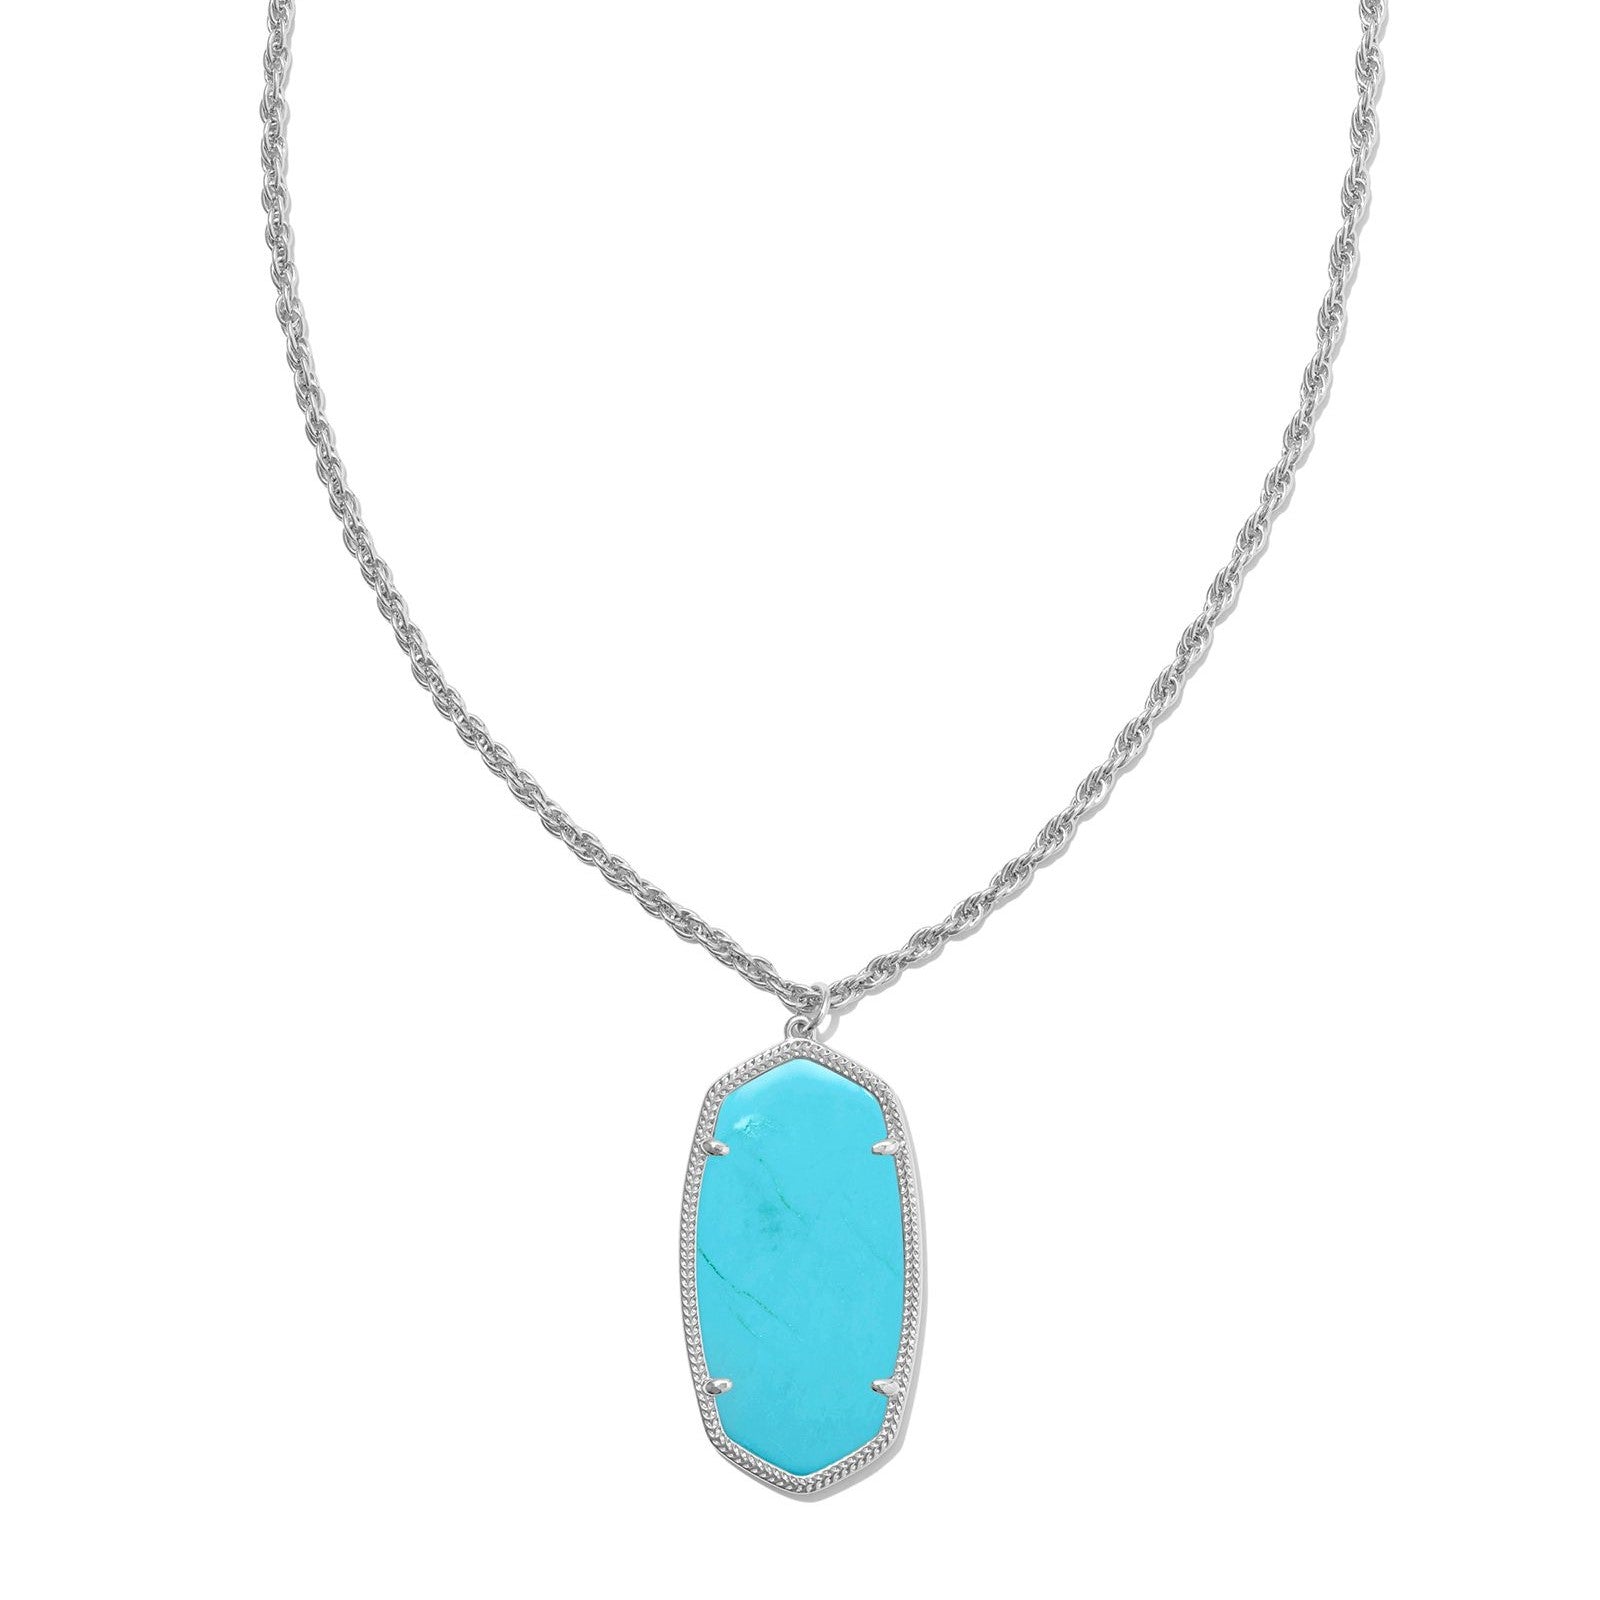 Kendra Scott | Rae Silver Long Pendant Necklace in Variegated Turquoise Magnesite - Giddy Up Glamour Boutique